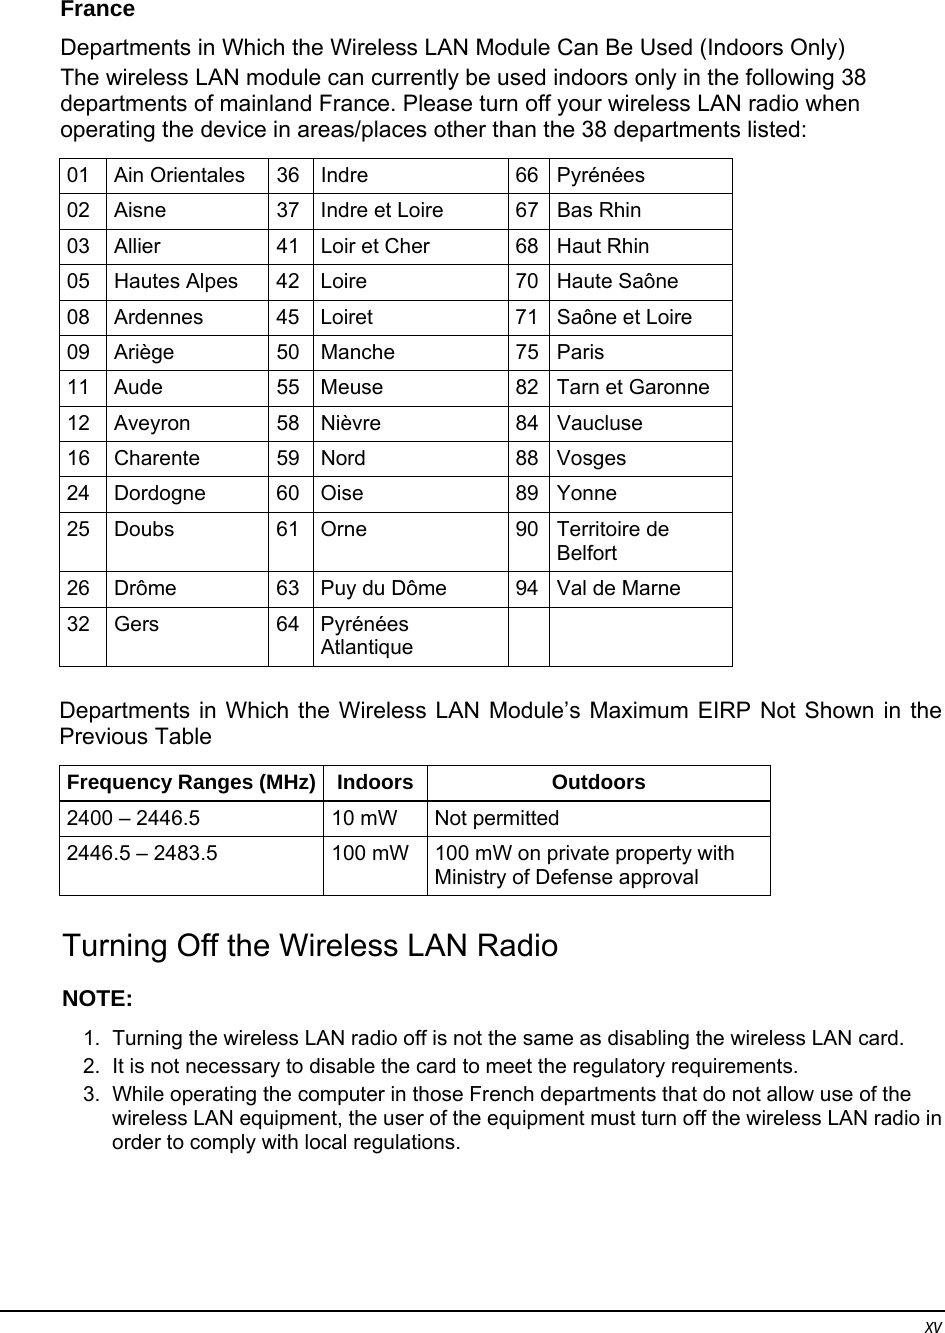 xv France Departments in Which the Wireless LAN Module Can Be Used (Indoors Only) The wireless LAN module can currently be used indoors only in the following 38 departments of mainland France. Please turn off your wireless LAN radio when operating the device in areas/places other than the 38 departments listed: 01 Ain Orientales  36 Indre  66 Pyrénées 02  Aisne  37  Indre et Loire  67 Bas Rhin 03  Allier  41  Loir et Cher  68 Haut Rhin 05  Hautes Alpes  42  Loire  70 Haute Saône 08  Ardennes  45  Loiret  71 Saône et Loire 09 Ariège  50 Manche  75 Paris 11  Aude  55  Meuse  82 Tarn et Garonne 12 Aveyron  58 Nièvre  84 Vaucluse 16 Charente  59 Nord  88 Vosges 24 Dordogne  60 Oise  89 Yonne 25 Doubs  61 Orne  90 Territoire de Belfort 26  Drôme  63  Puy du Dôme  94 Val de Marne 32 Gers  64 Pyrénées Atlantique    Departments in Which the Wireless LAN Module’s Maximum EIRP Not Shown in the Previous Table Frequency Ranges (MHz)  Indoors  Outdoors 2400 – 2446.5  10 mW  Not permitted 2446.5 – 2483.5  100 mW  100 mW on private property with Ministry of Defense approval  Turning Off the Wireless LAN Radio NOTE:  1.  Turning the wireless LAN radio off is not the same as disabling the wireless LAN card.  2.  It is not necessary to disable the card to meet the regulatory requirements. 3.  While operating the computer in those French departments that do not allow use of the wireless LAN equipment, the user of the equipment must turn off the wireless LAN radio in order to comply with local regulations. 